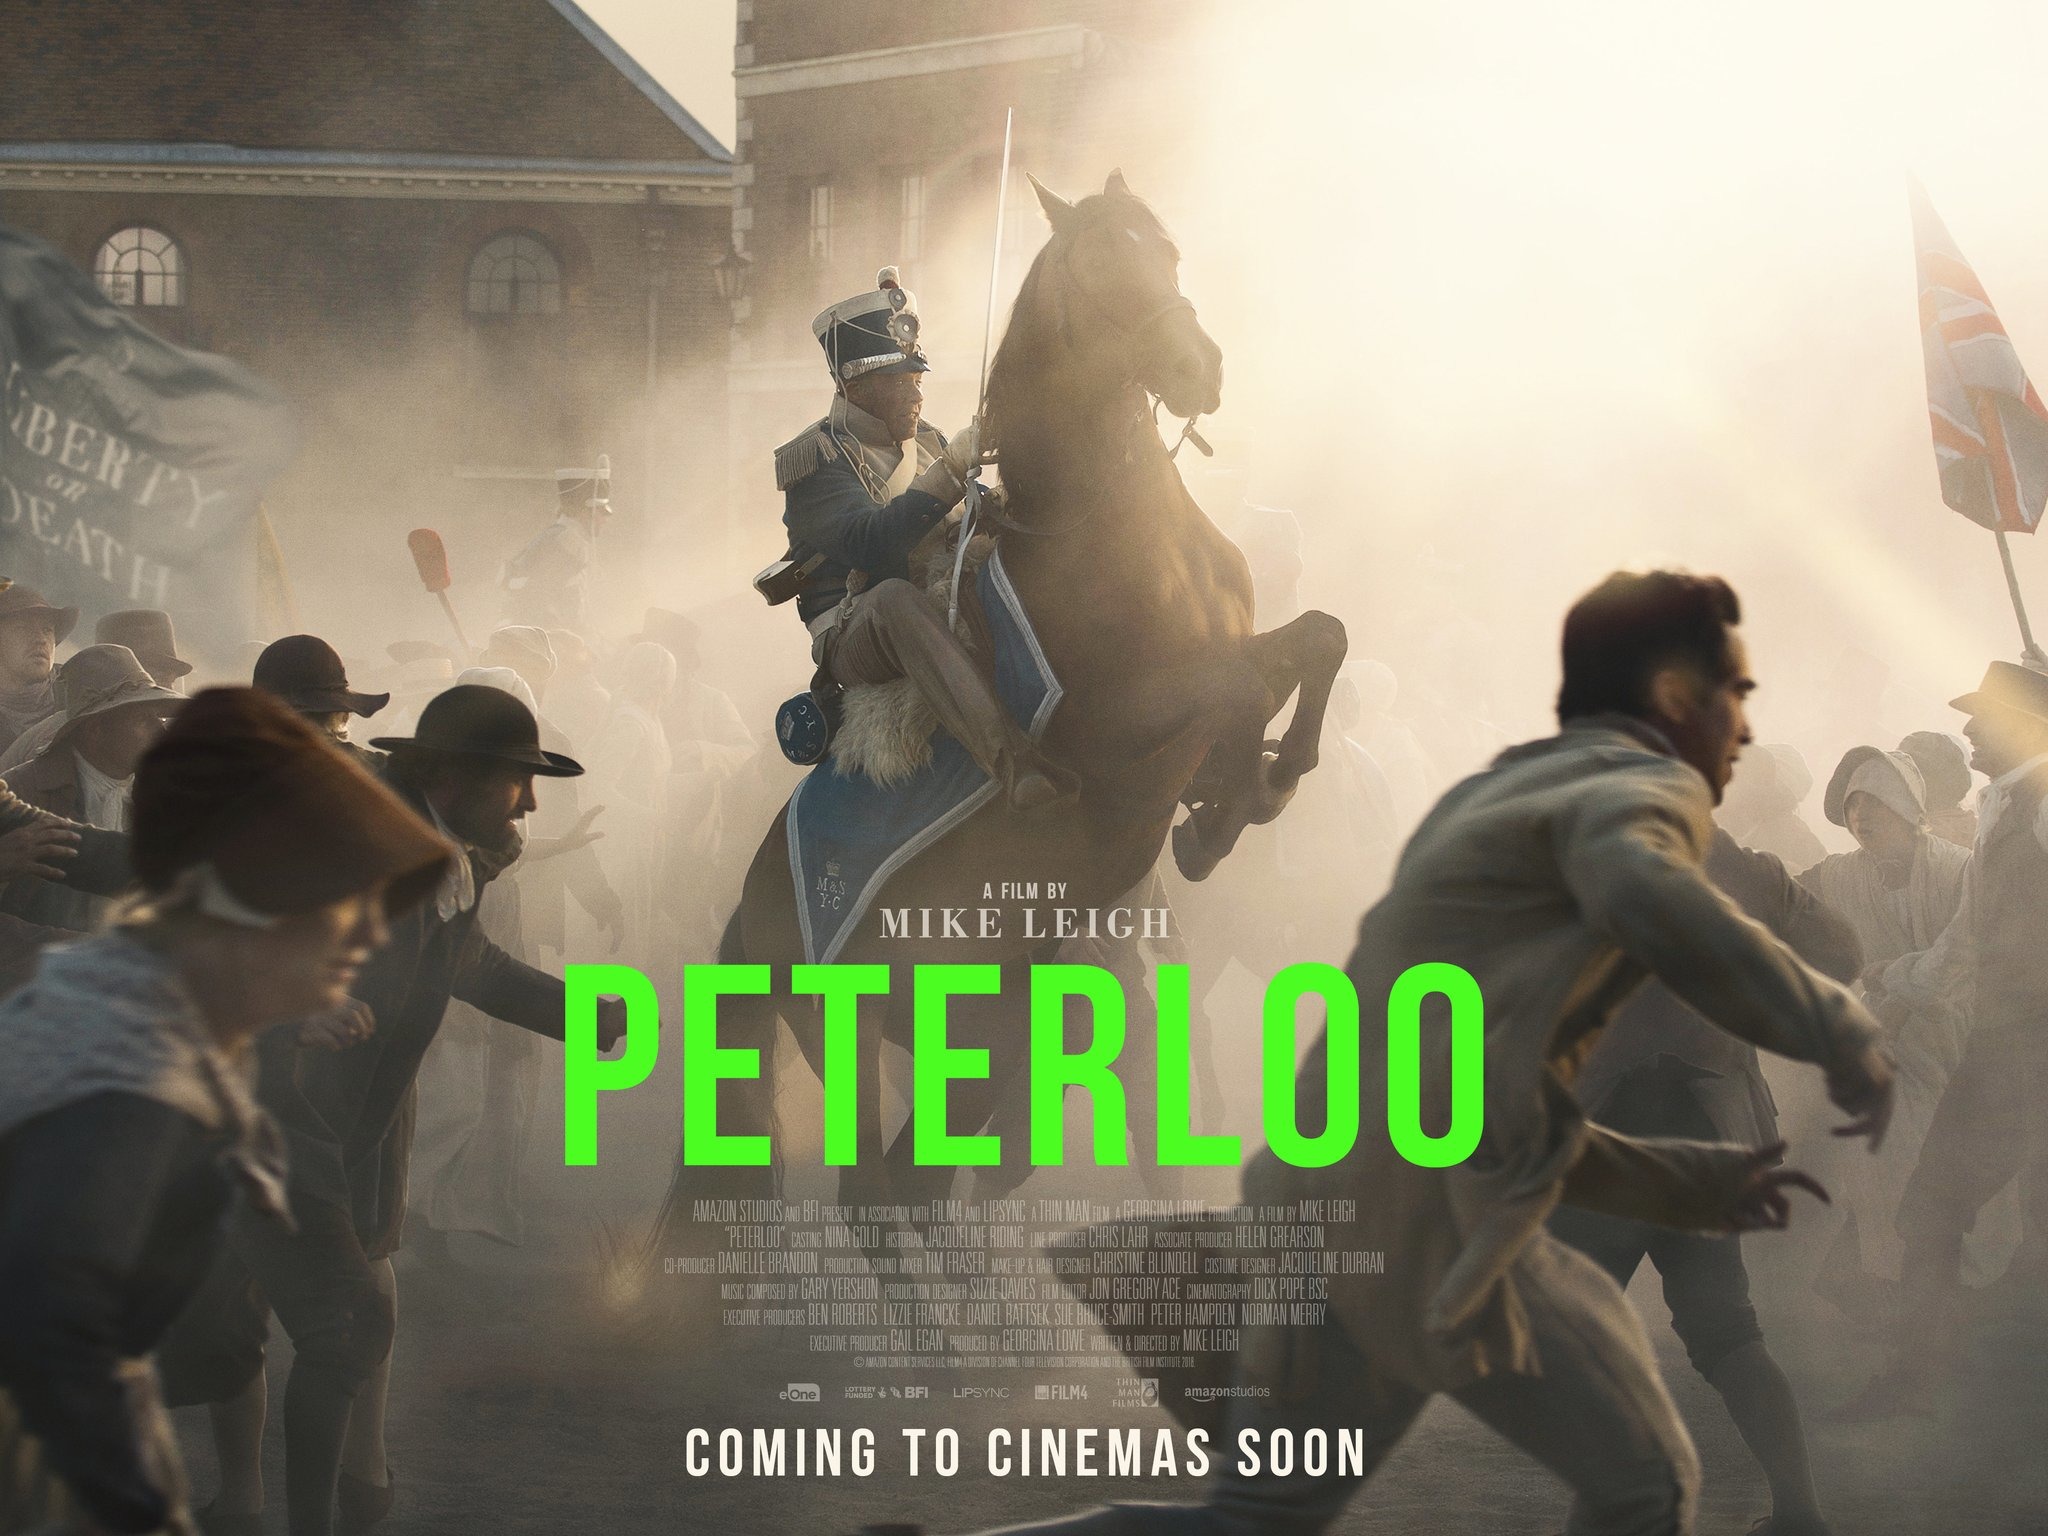 Mega Sized Movie Poster Image for Peterloo (#2 of 2)